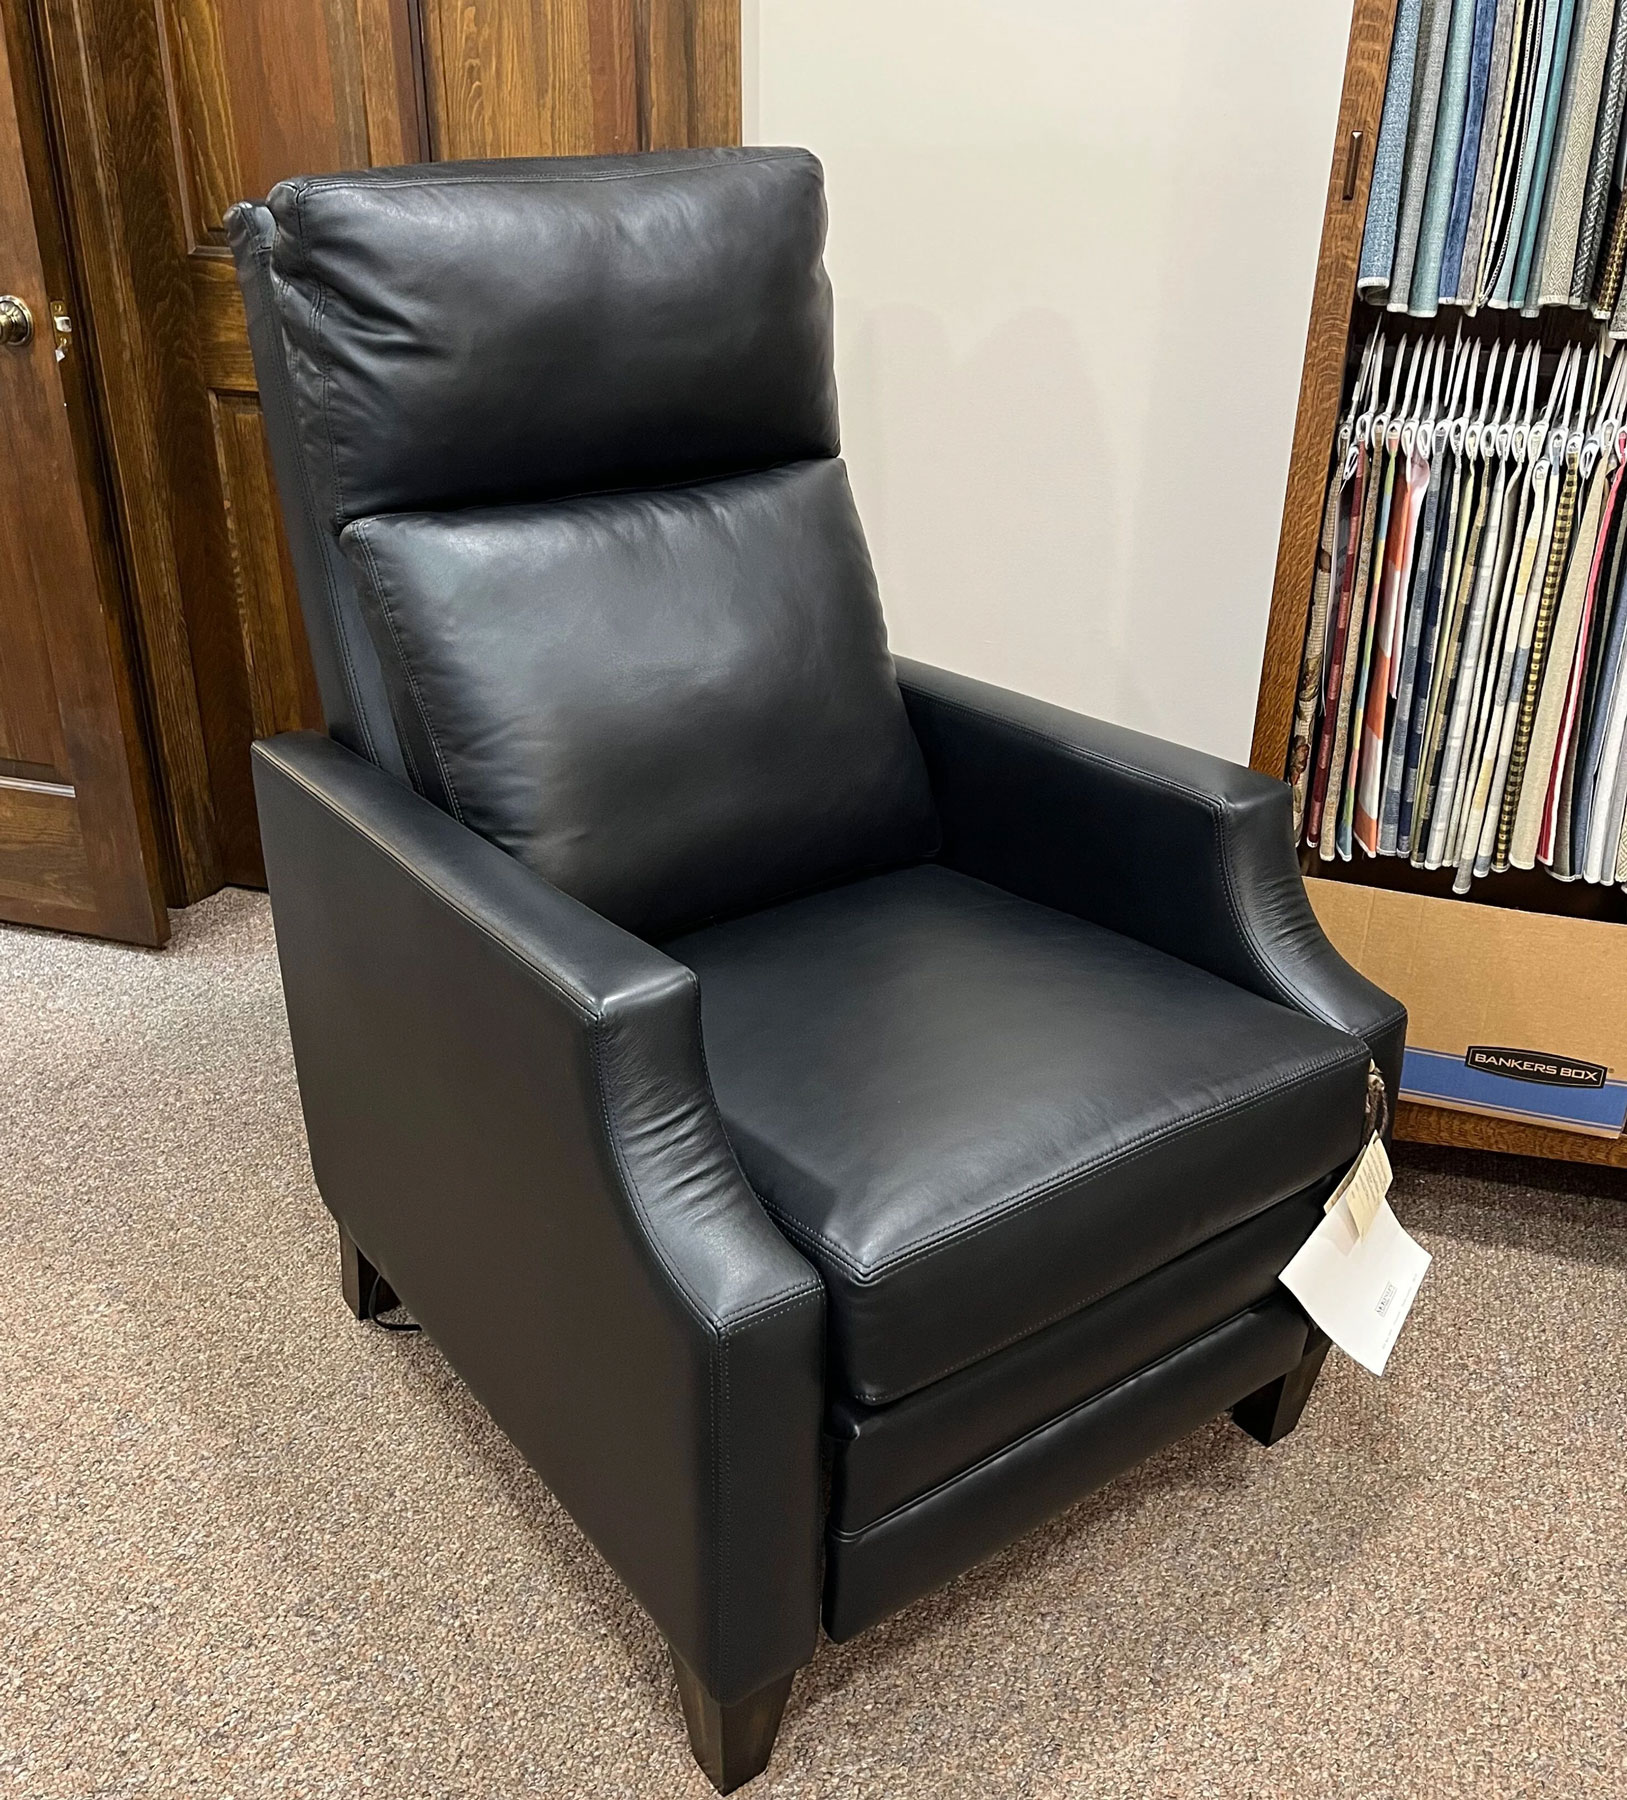 McKinley Leather 90 Smith Power Recliner in Mohican Panther Leather